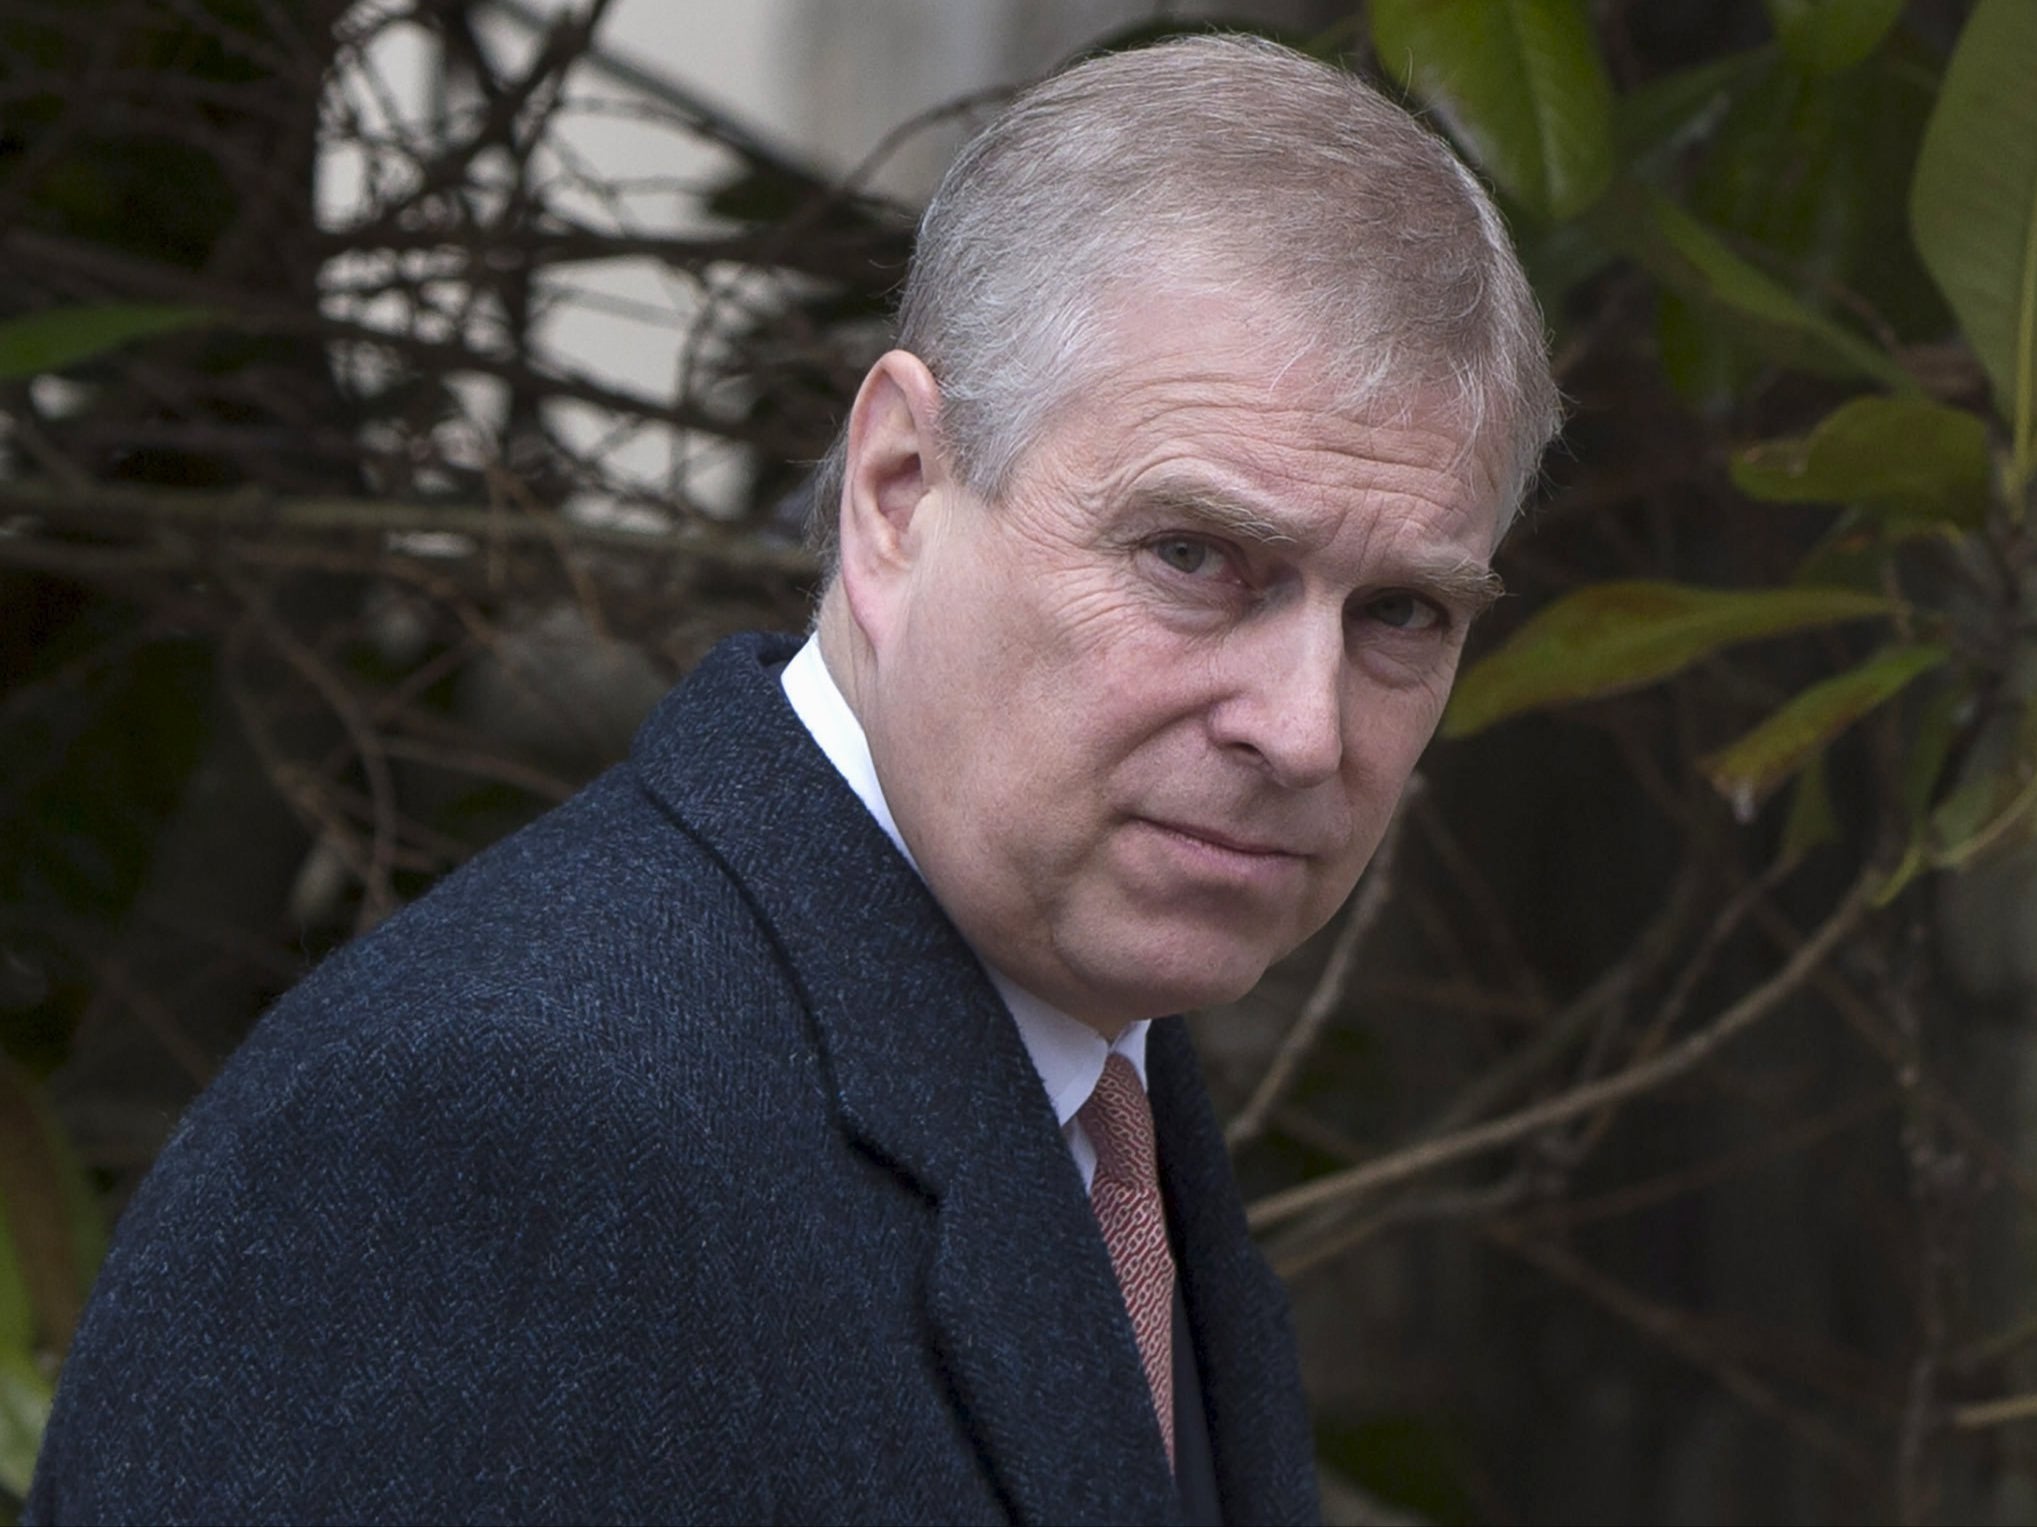 Prince Andrew, 63, was UK’s special representative for trade and industry for ten years